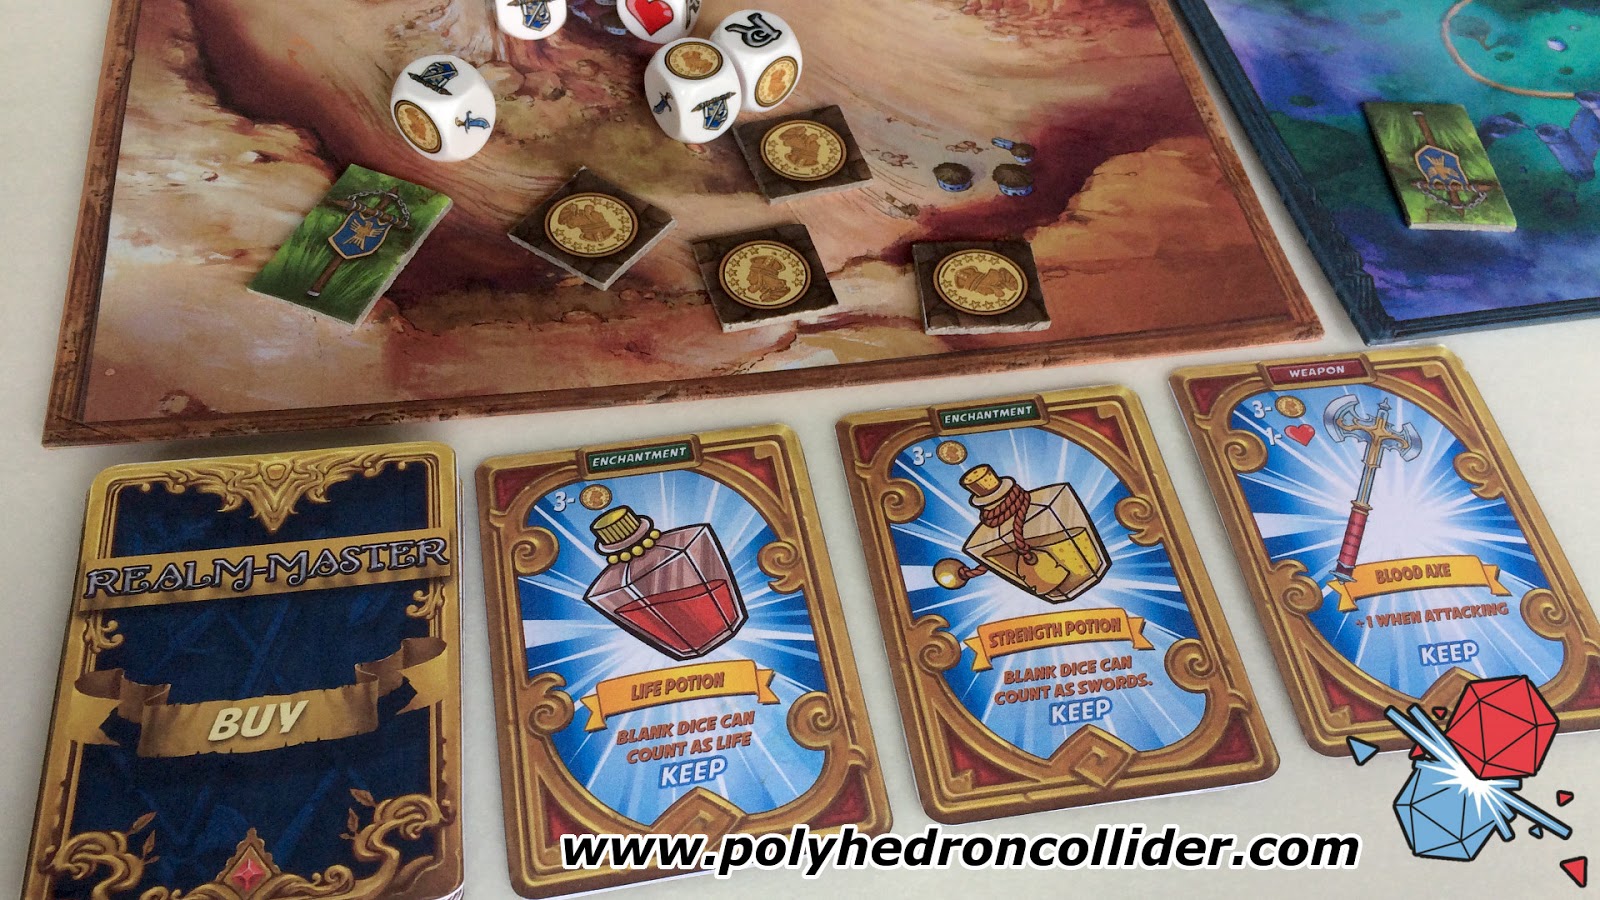 Realm master dice game review power up cards